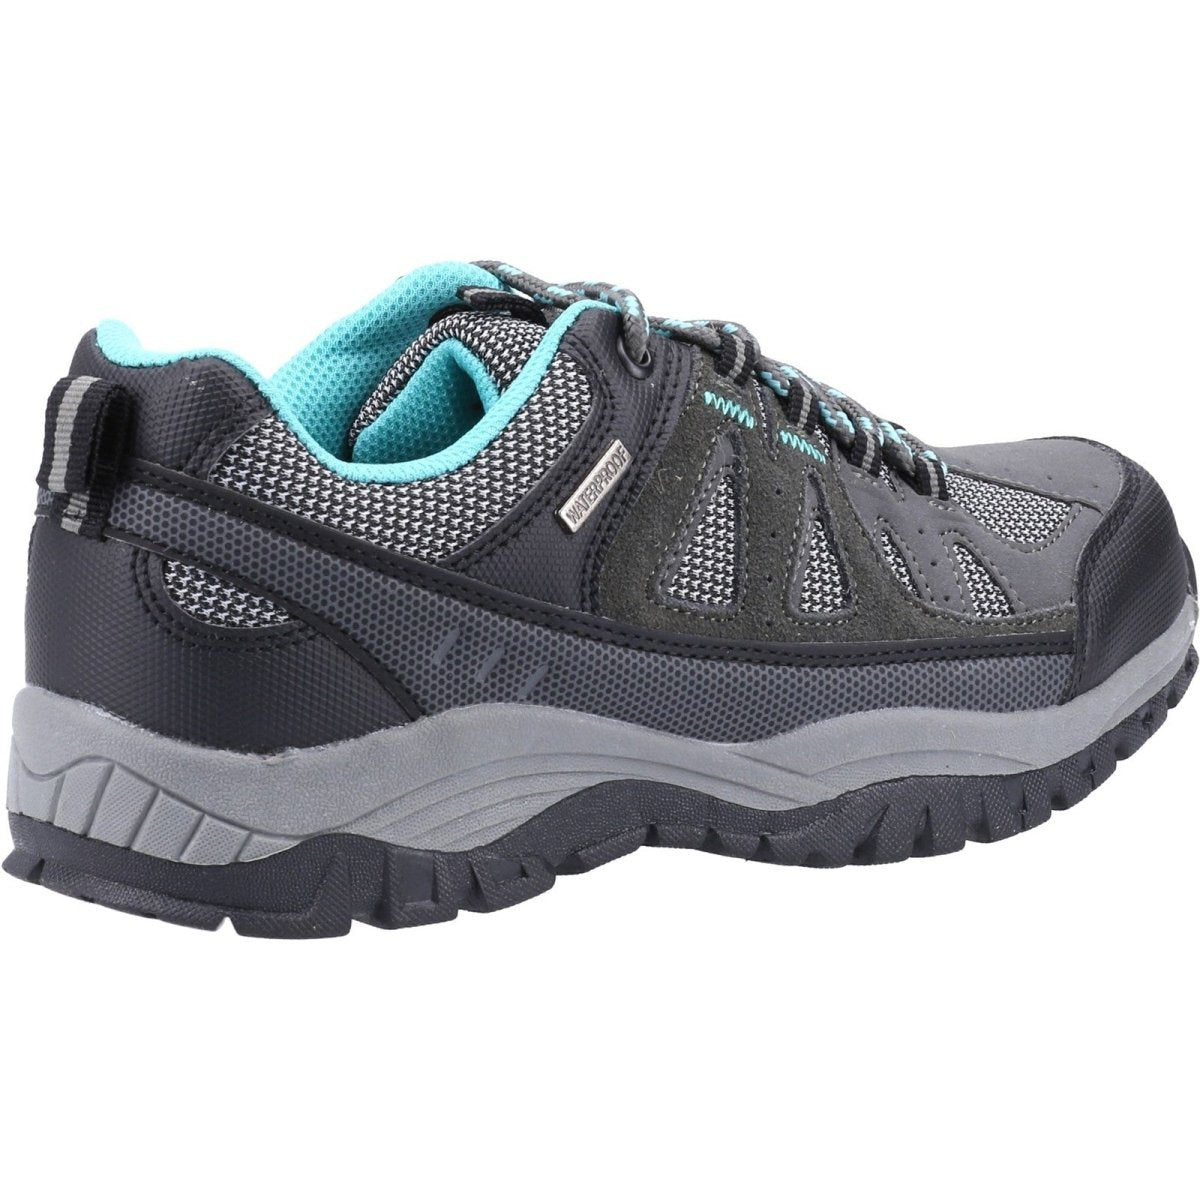 Cotswold Maisemore Low Ladies Hiking Boot - Shoe Store Direct